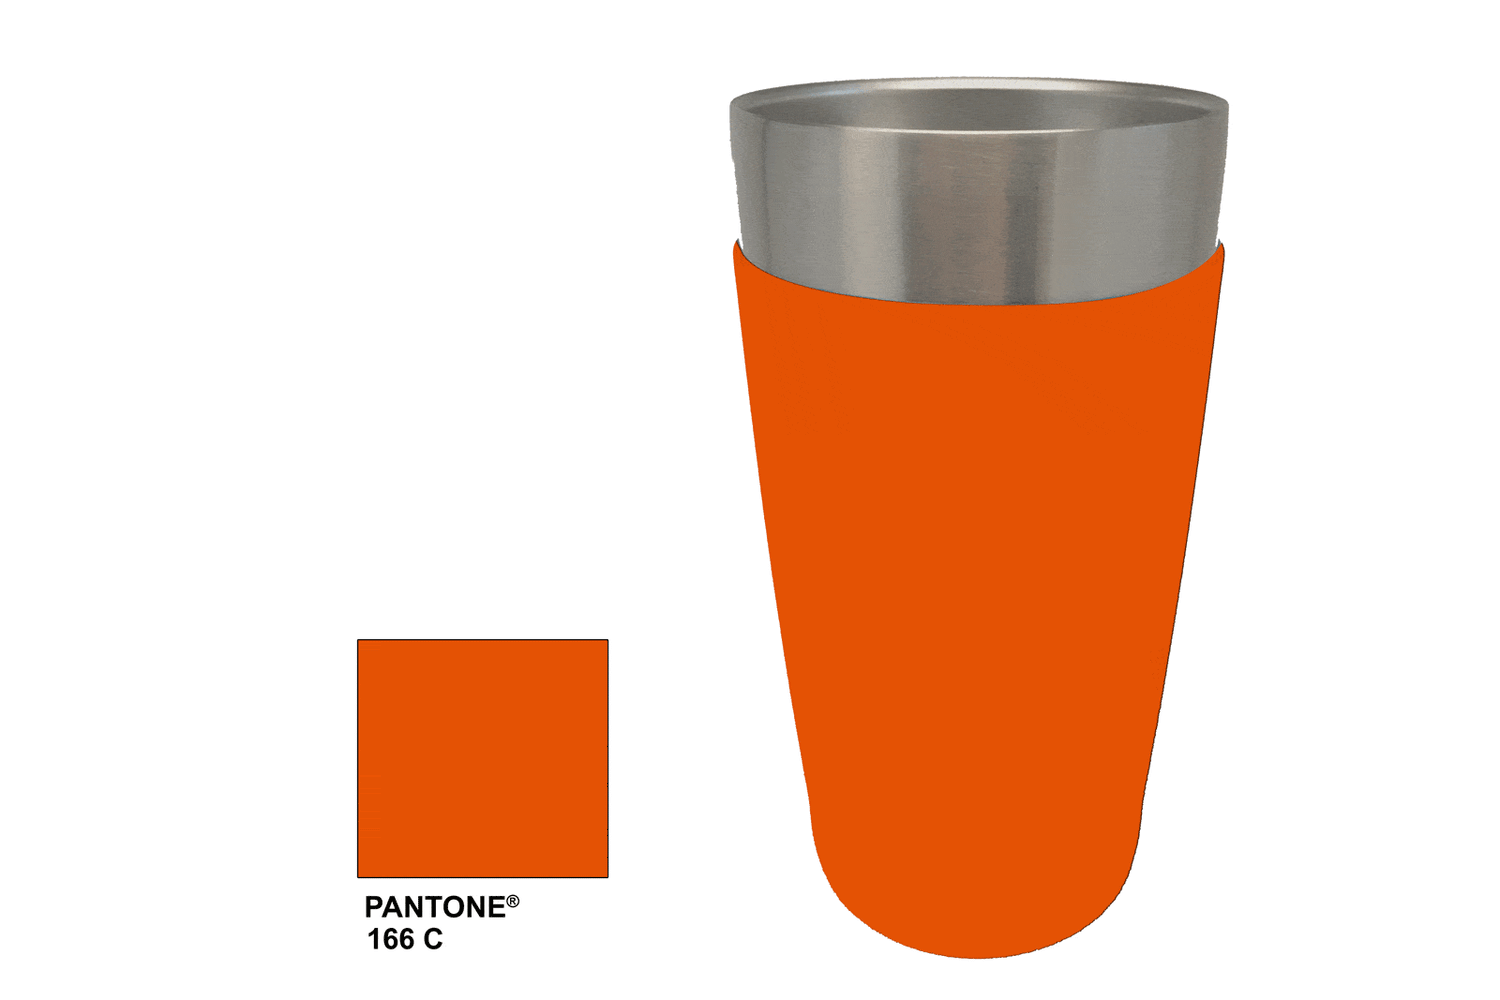 Universal Colored Tumbler-Skinz™ - 20 Oz - NorChill® Coolers & Drinkware